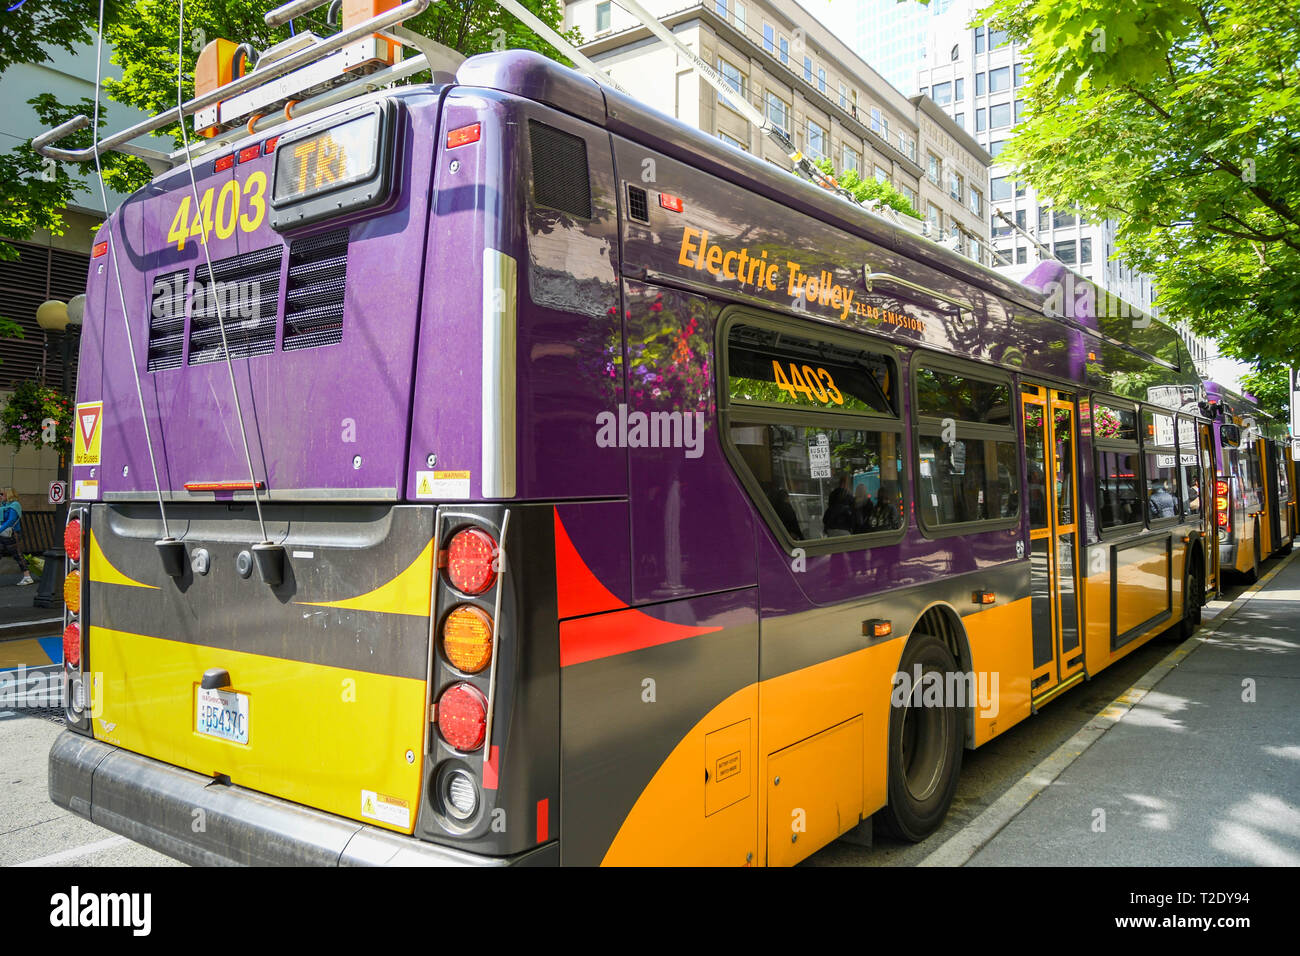 SEATTLE, WASHINGTON STATE, USA - JUNE 2018: Rear view of a zero emissions electric trolley bus on a street in Seattle city centre. Stock Photo